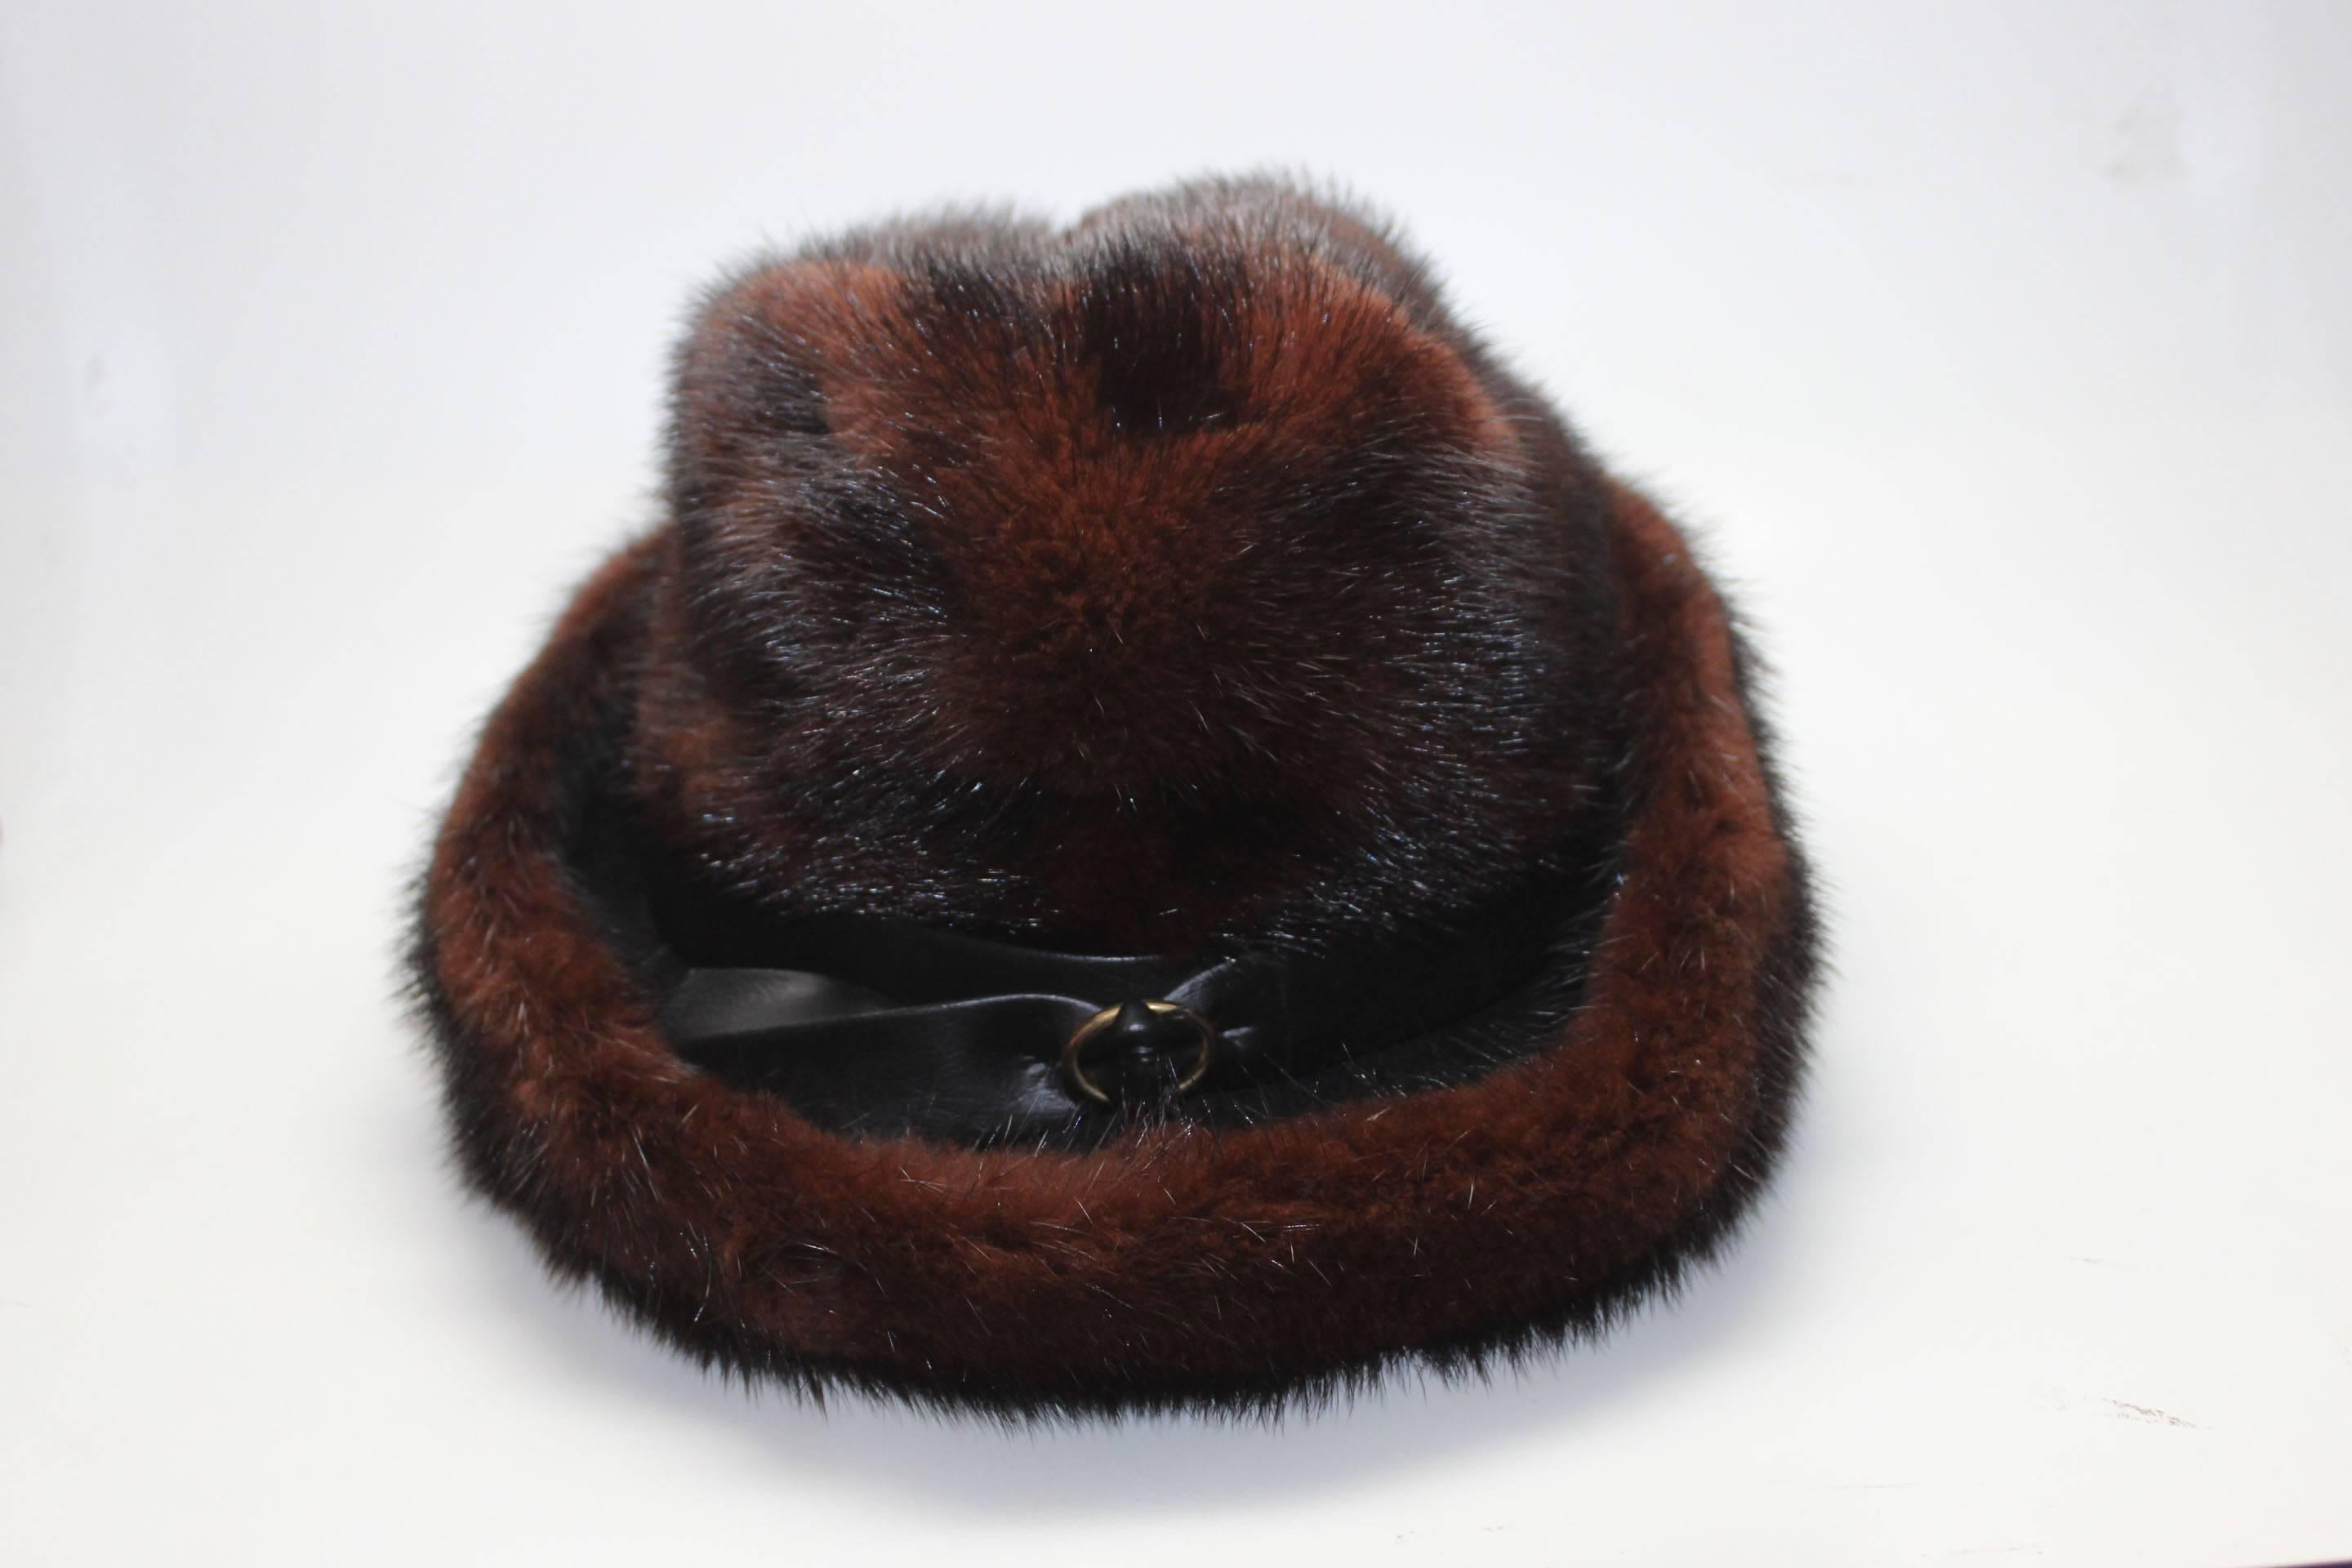 This mink hat has an unusual shape for the 1950s. Most common styles are pill boxes and close fitting shapes without brims. This hat appears to be based on a mens fedora. The mink fur is in a black/brown combination and can be worn with either